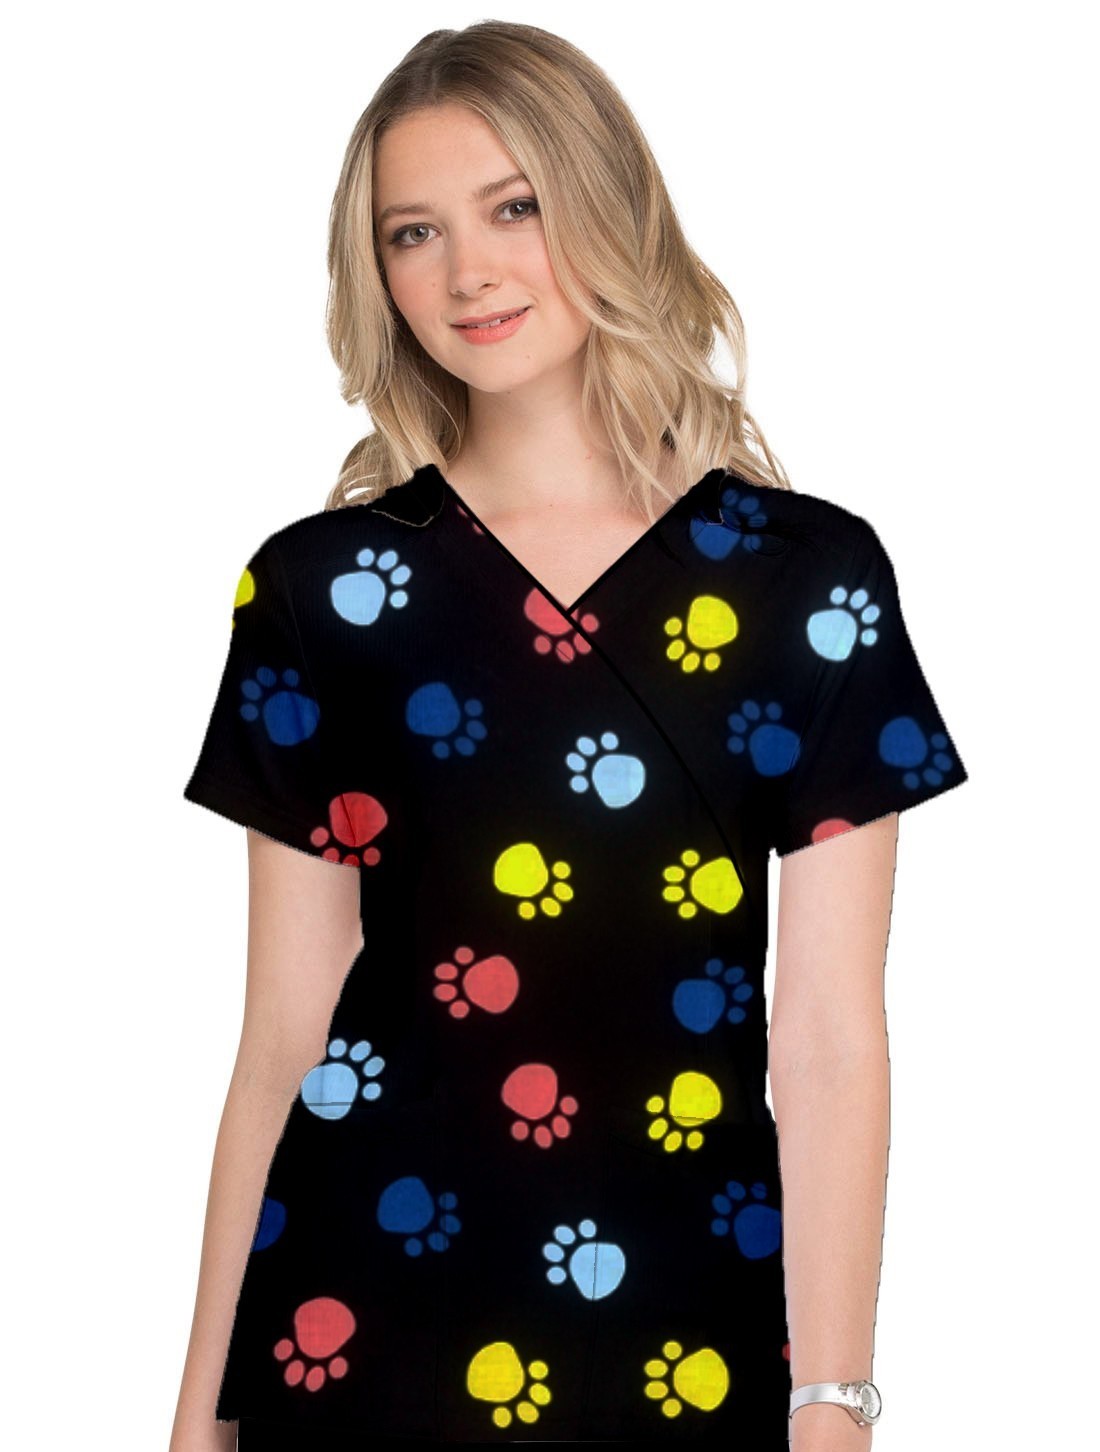 Paw Printed Top Mock Wrap With Black Piping 3 Pocket Half Selves